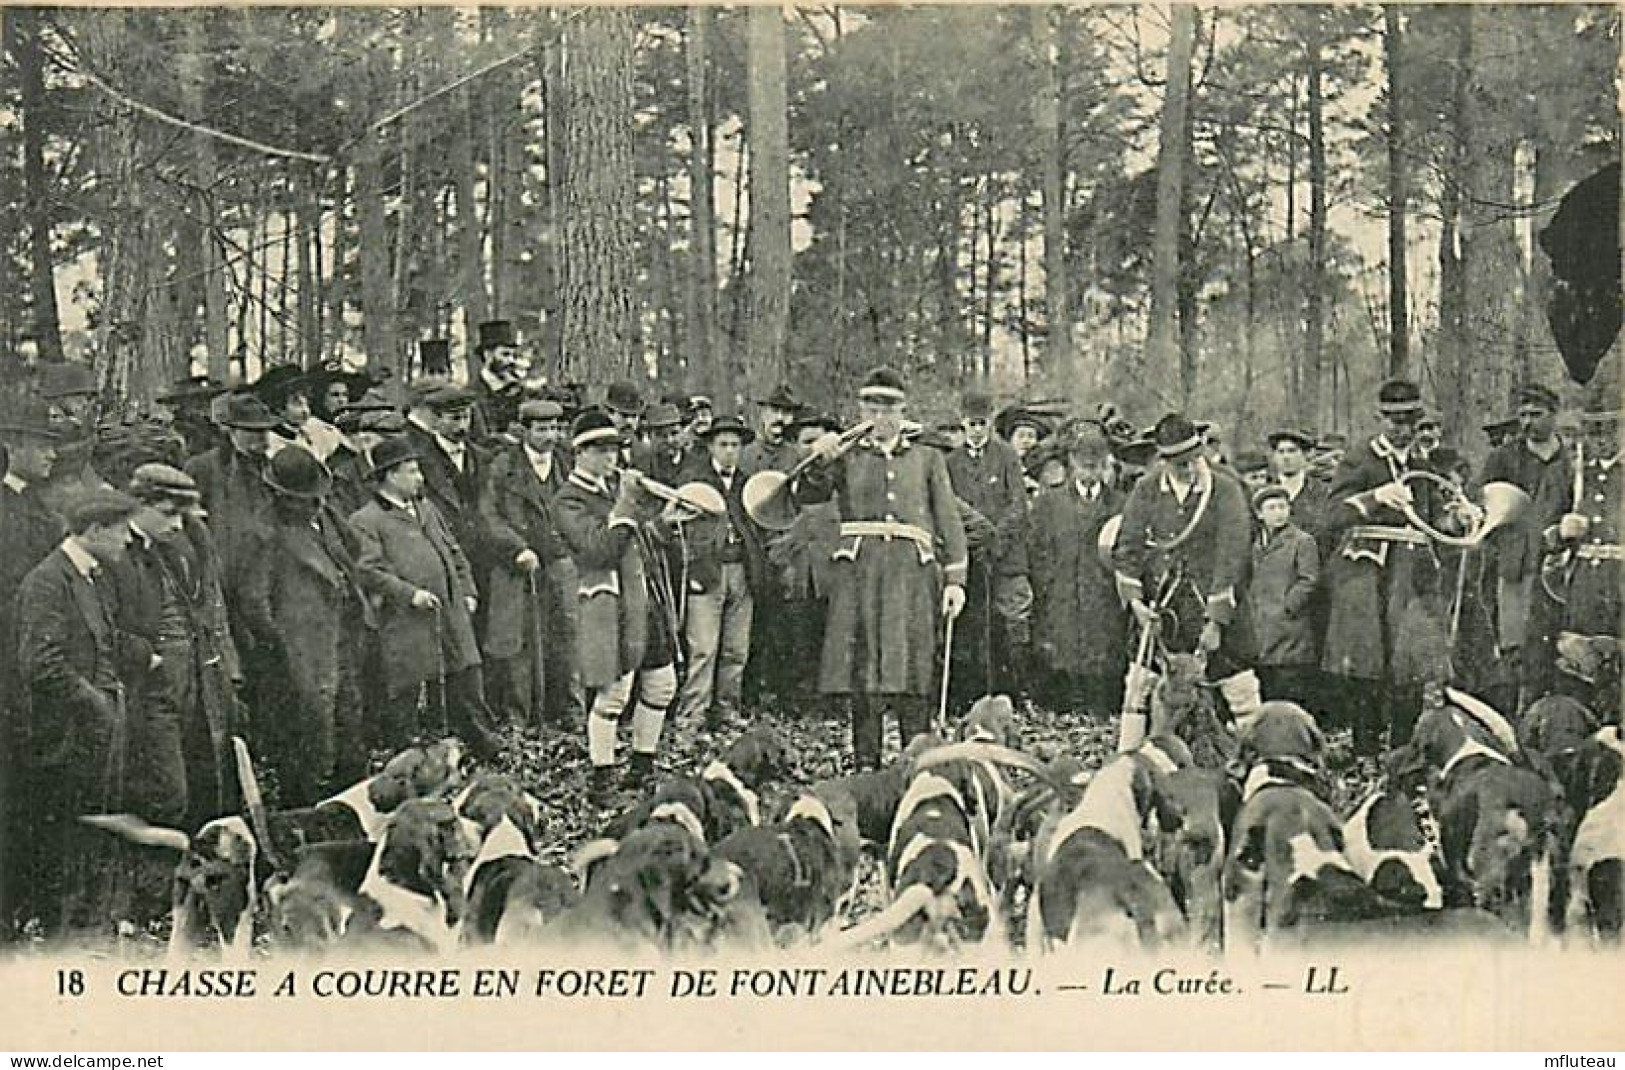 77* FONTAINEBLEAU Chasse A Courre la Curee   RL08.0157 - Hunting